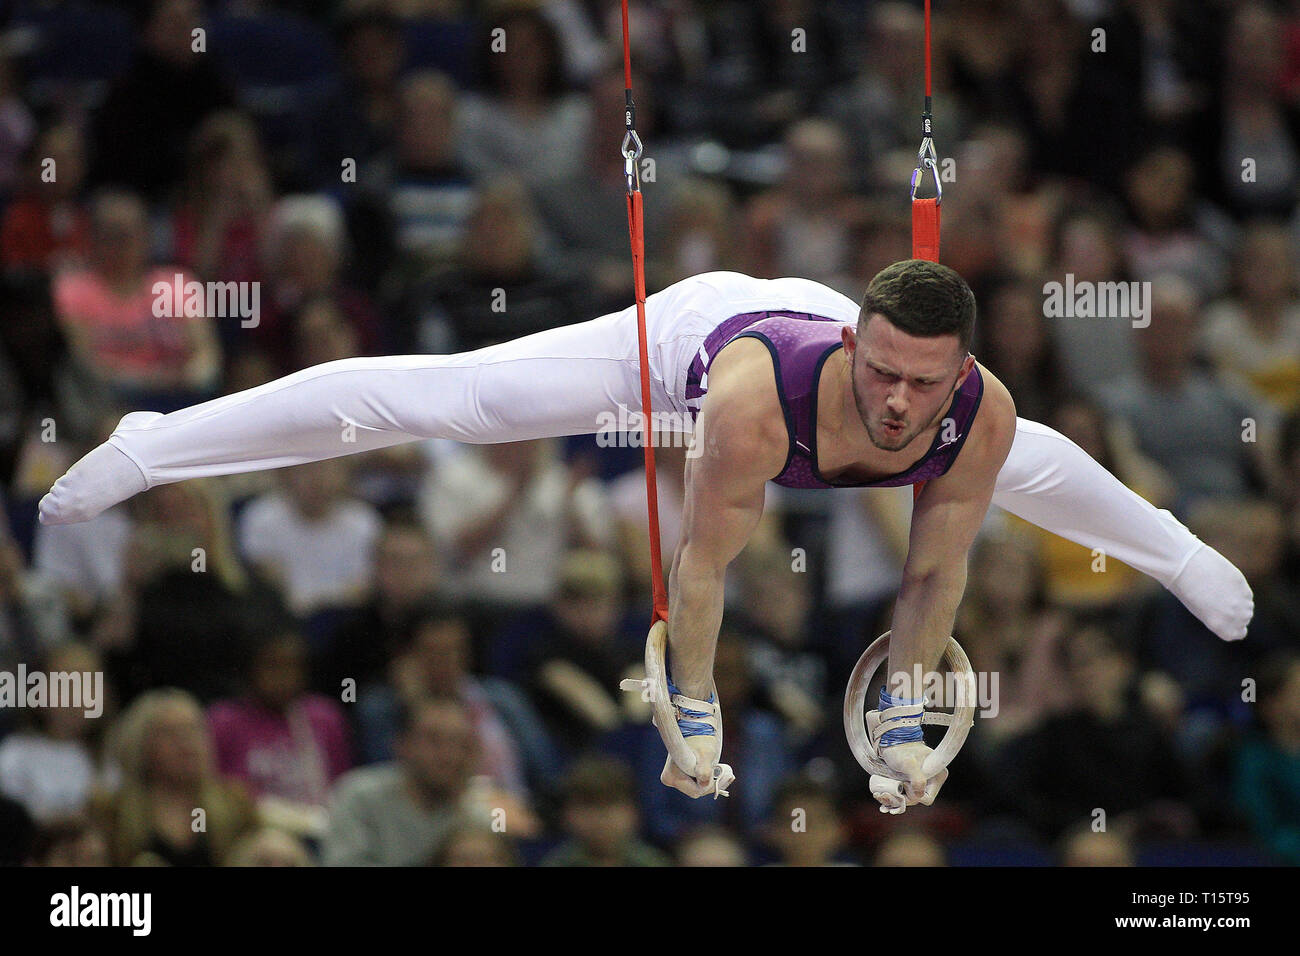 London, UK. 23rd Mar 2019. Dominick Cunningham of Great Britain during the Men's Rings. Superstars of Gymnastics event at The O2 in London on Saturday  23rd March 2019.  Editorial usage only. picture by Steffan Bowen/Andrew Orchard sports photography/Alamy Live News Stock Photo